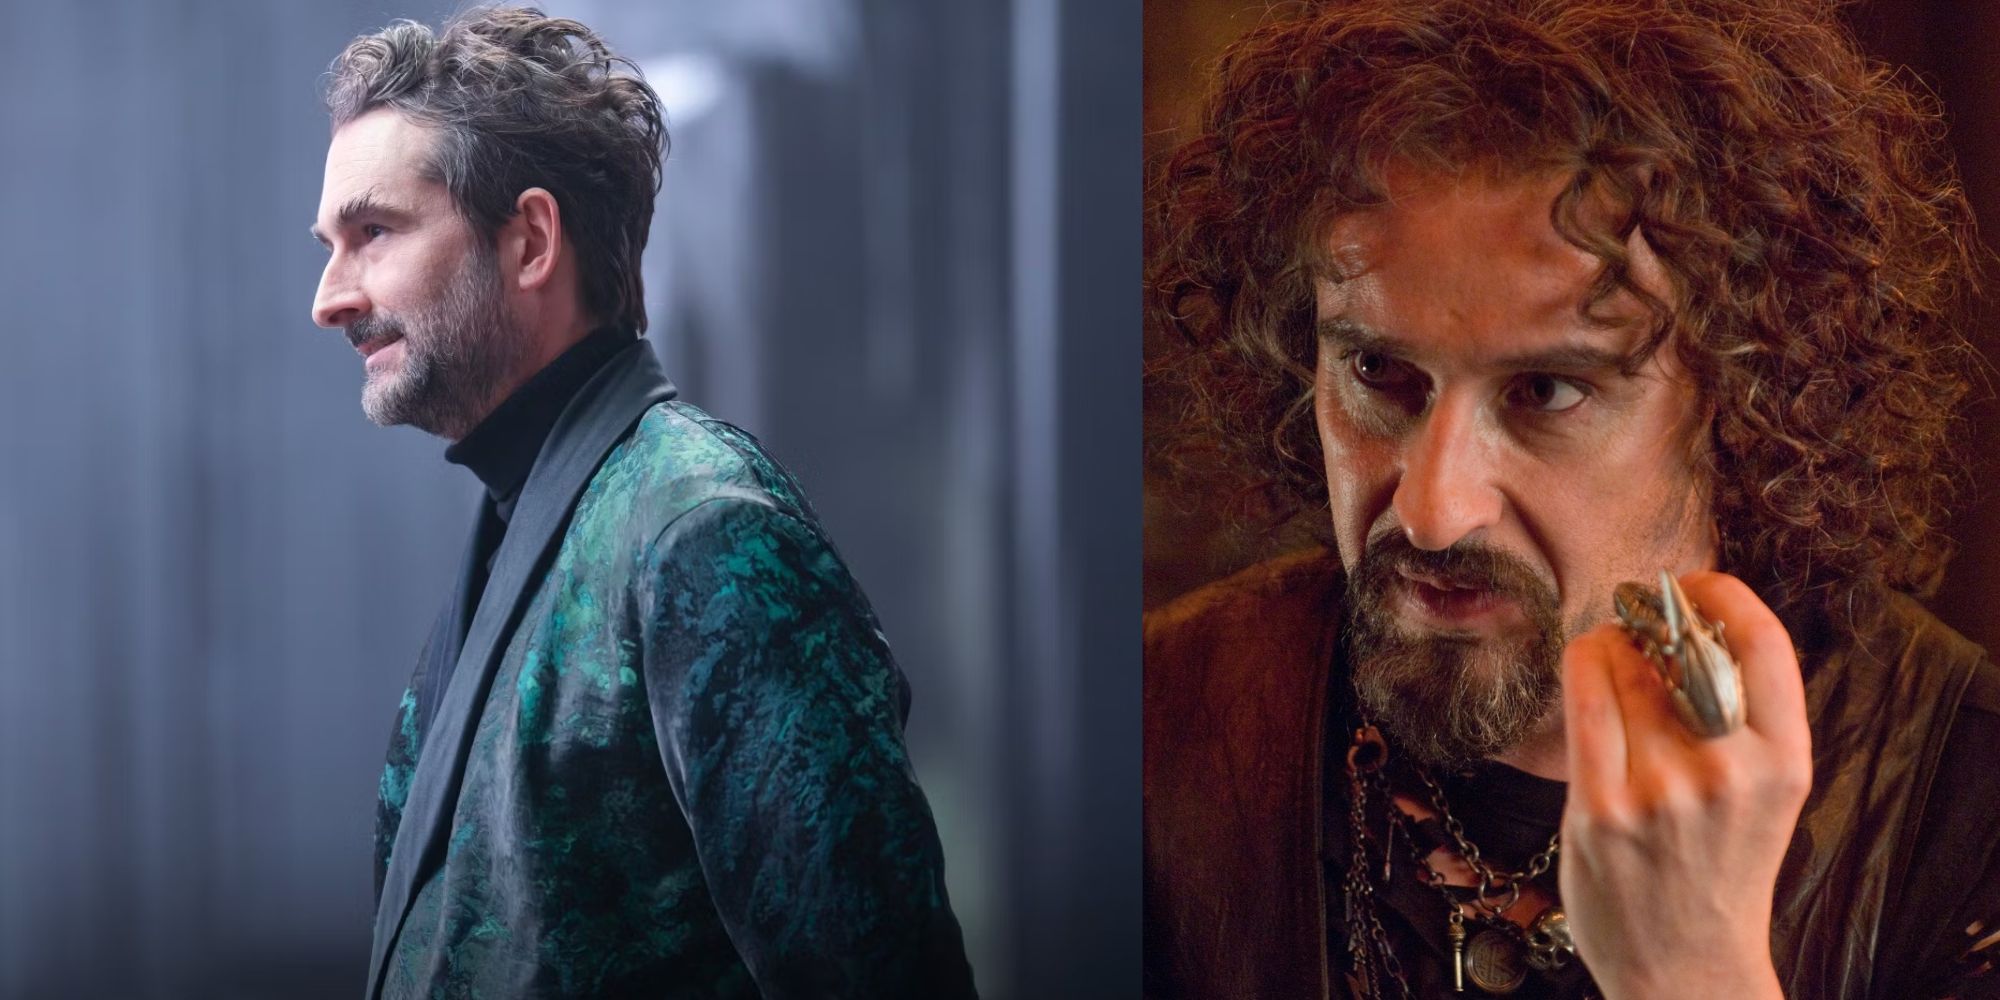 Jay Duplass and Steve Coogan as Hades in the Percy Jackson show and movie, respectively.